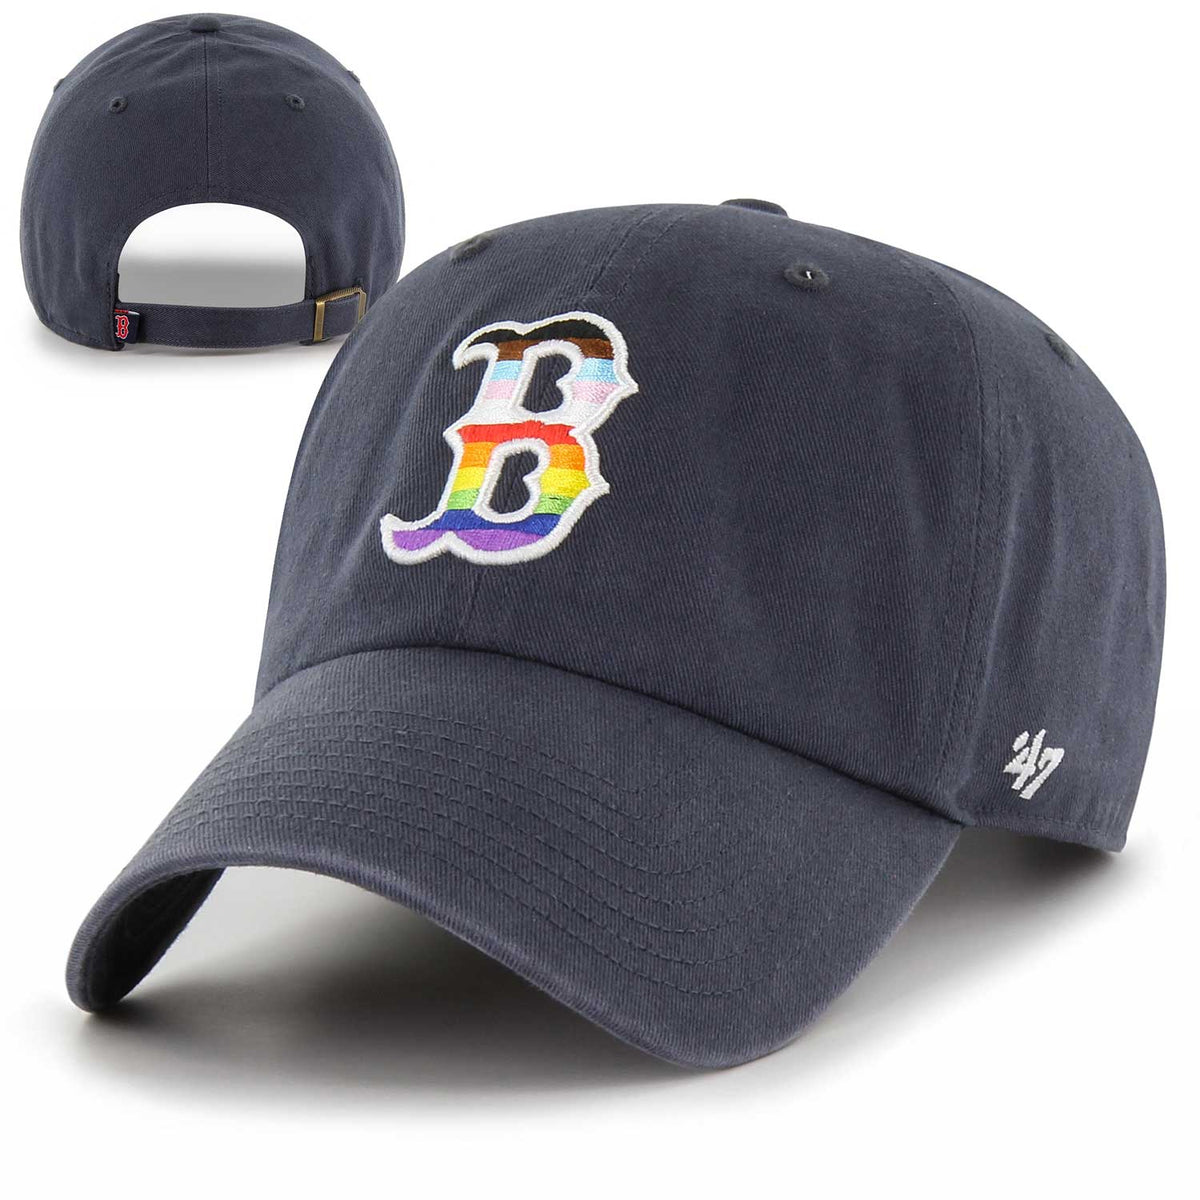 Boston Red Sox '47 Two Sox Pride Adjustable Hat - Navy